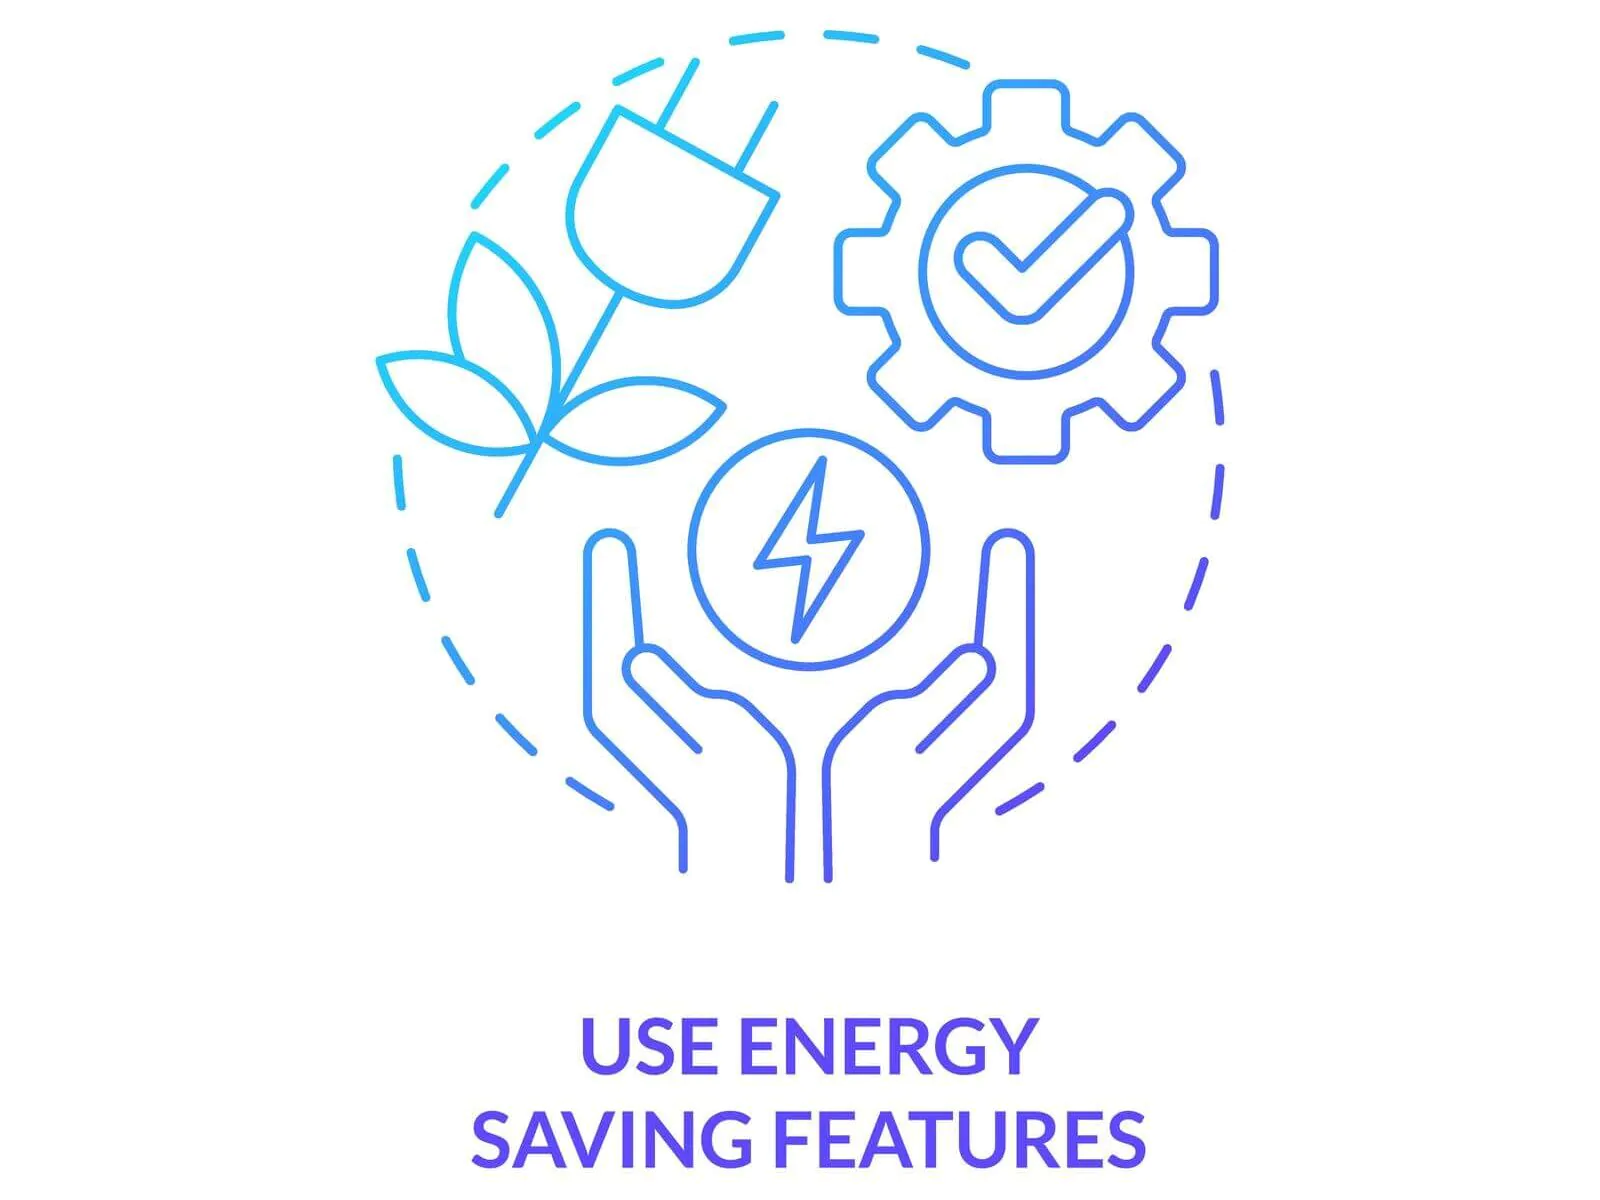 energy saving features concept icon